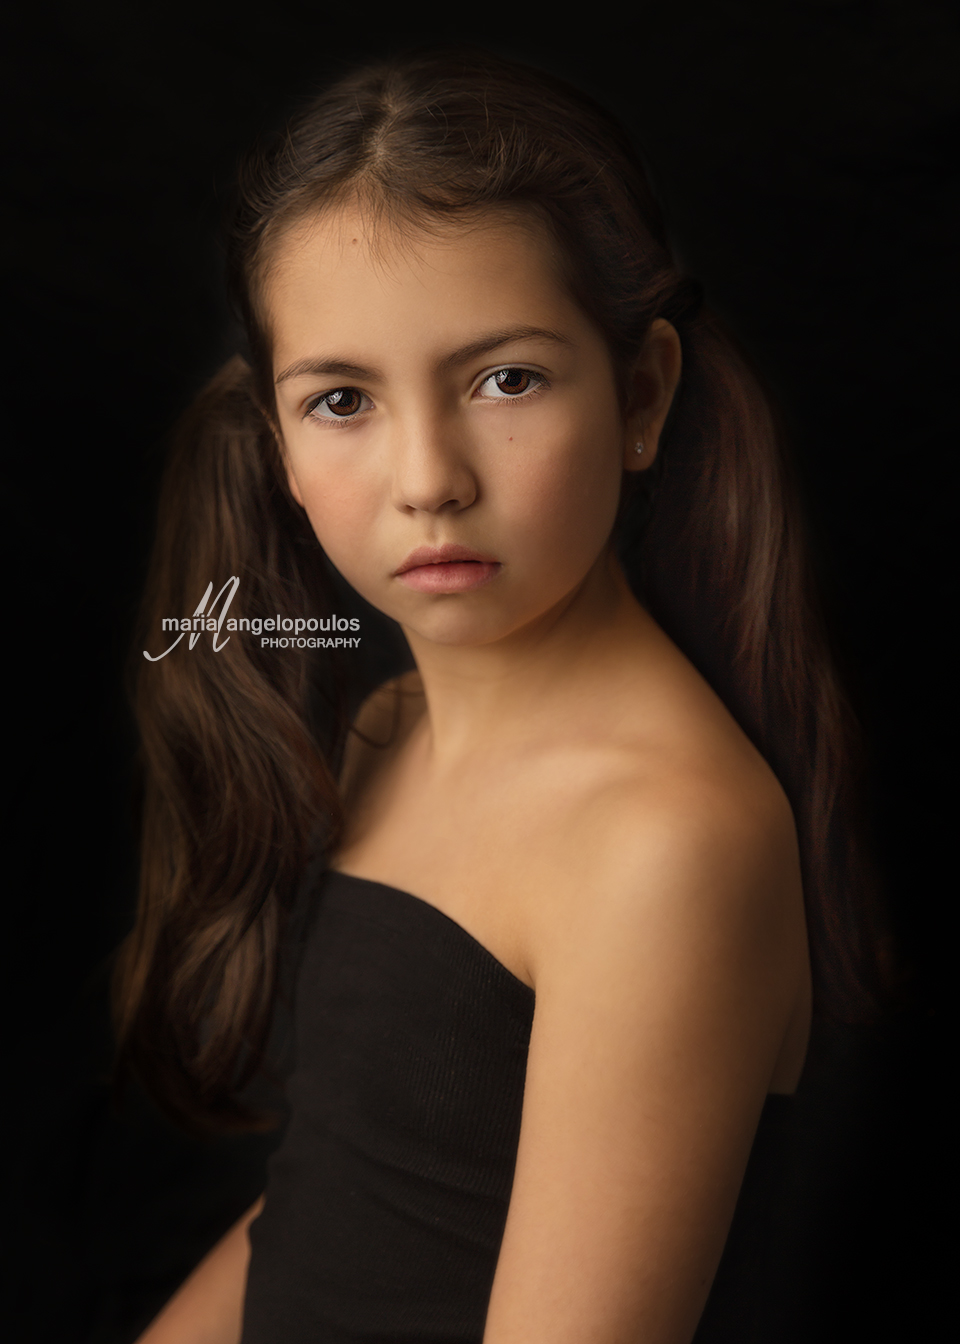 ChildFineArt - Children's Fine Art, Art, kids, portrait, photography. by Maria Angelopoulos Photogrpahy